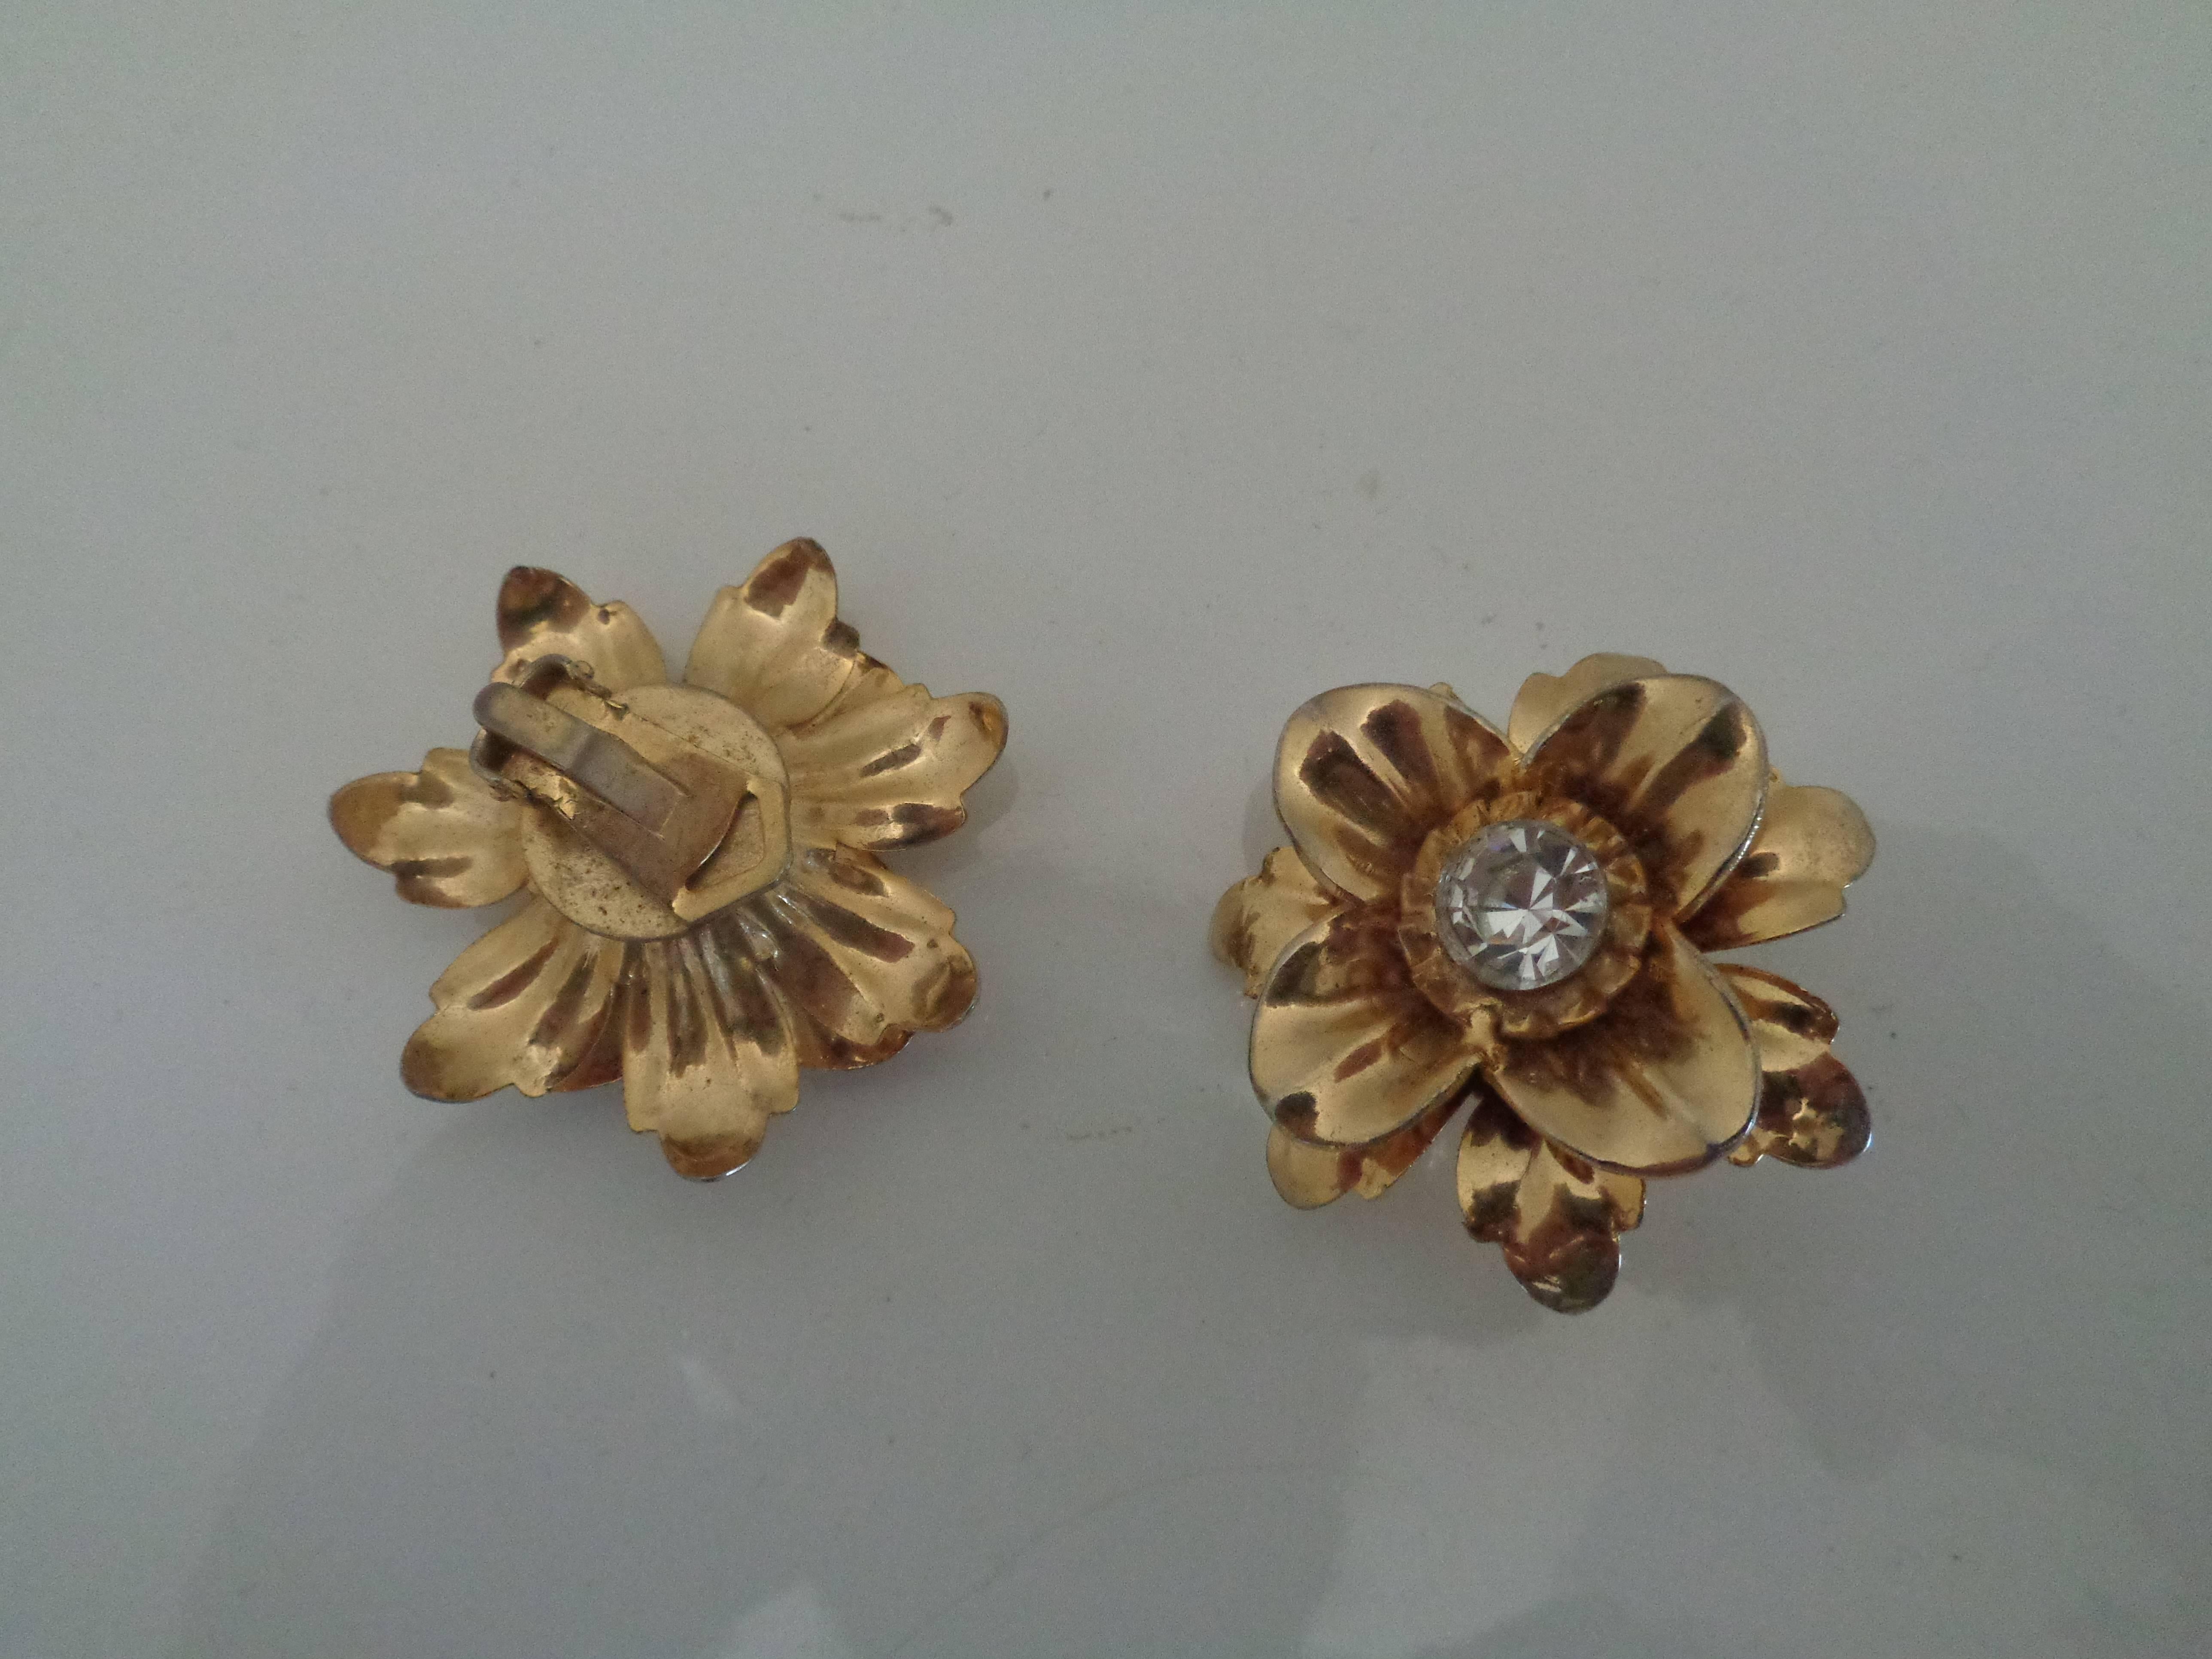 1980s Gold tone flowers with Crystal Swarovsky clip on earrings
measurements: 4 cm x 4 cm